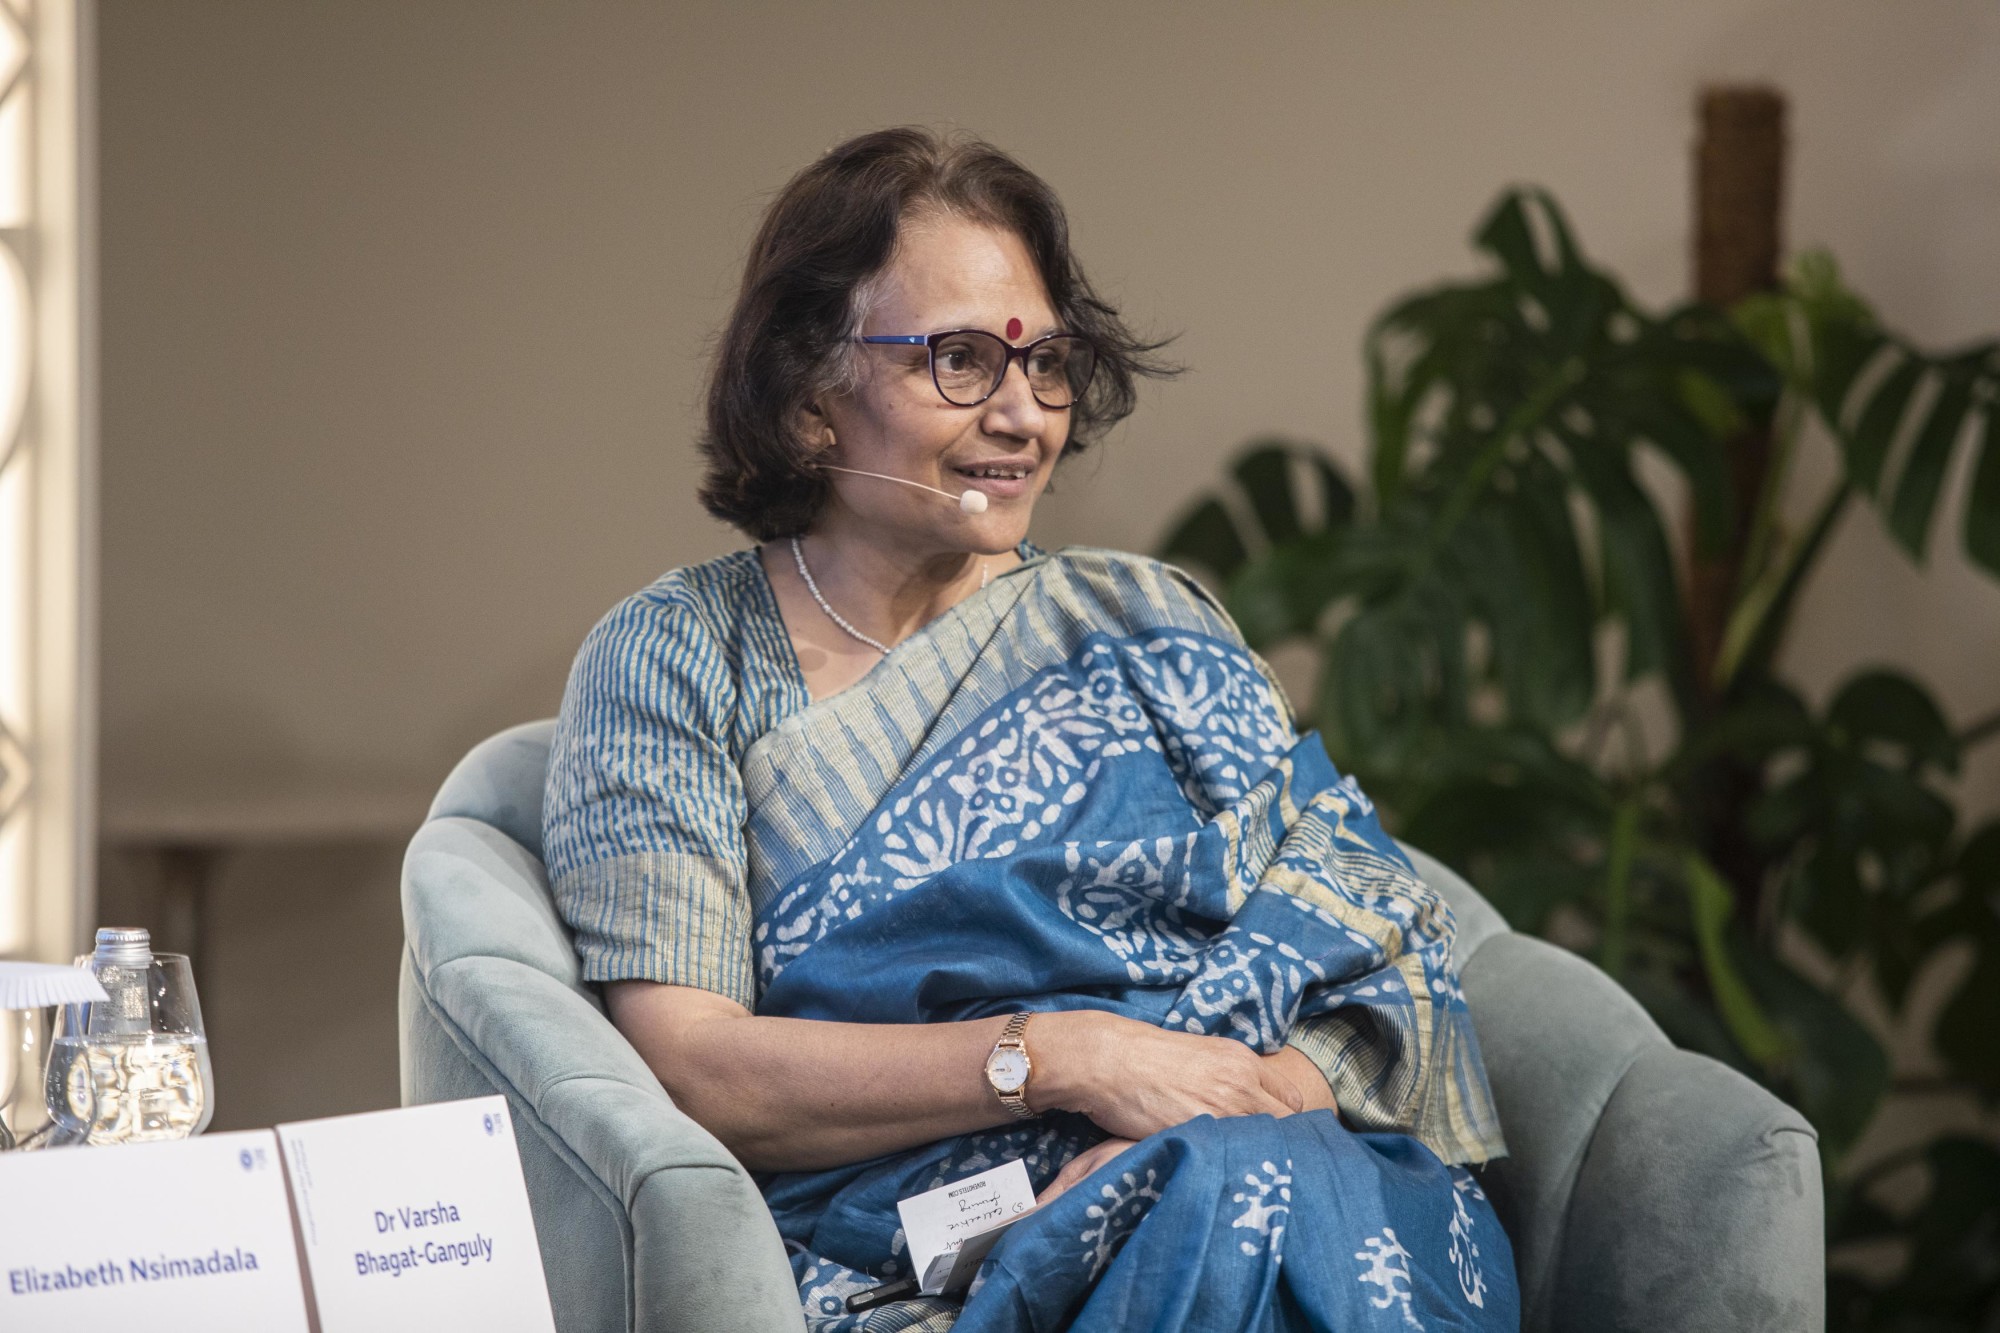 Dr Varsha Bhagat-Ganguly, Professor, Nirma University and Lal Bahadur Shastri Academy of Administration, India speaks during Women’s World Majlis From Farmer to Boss Lady Developing a gender-equitable agricultural sector at the Women-s P